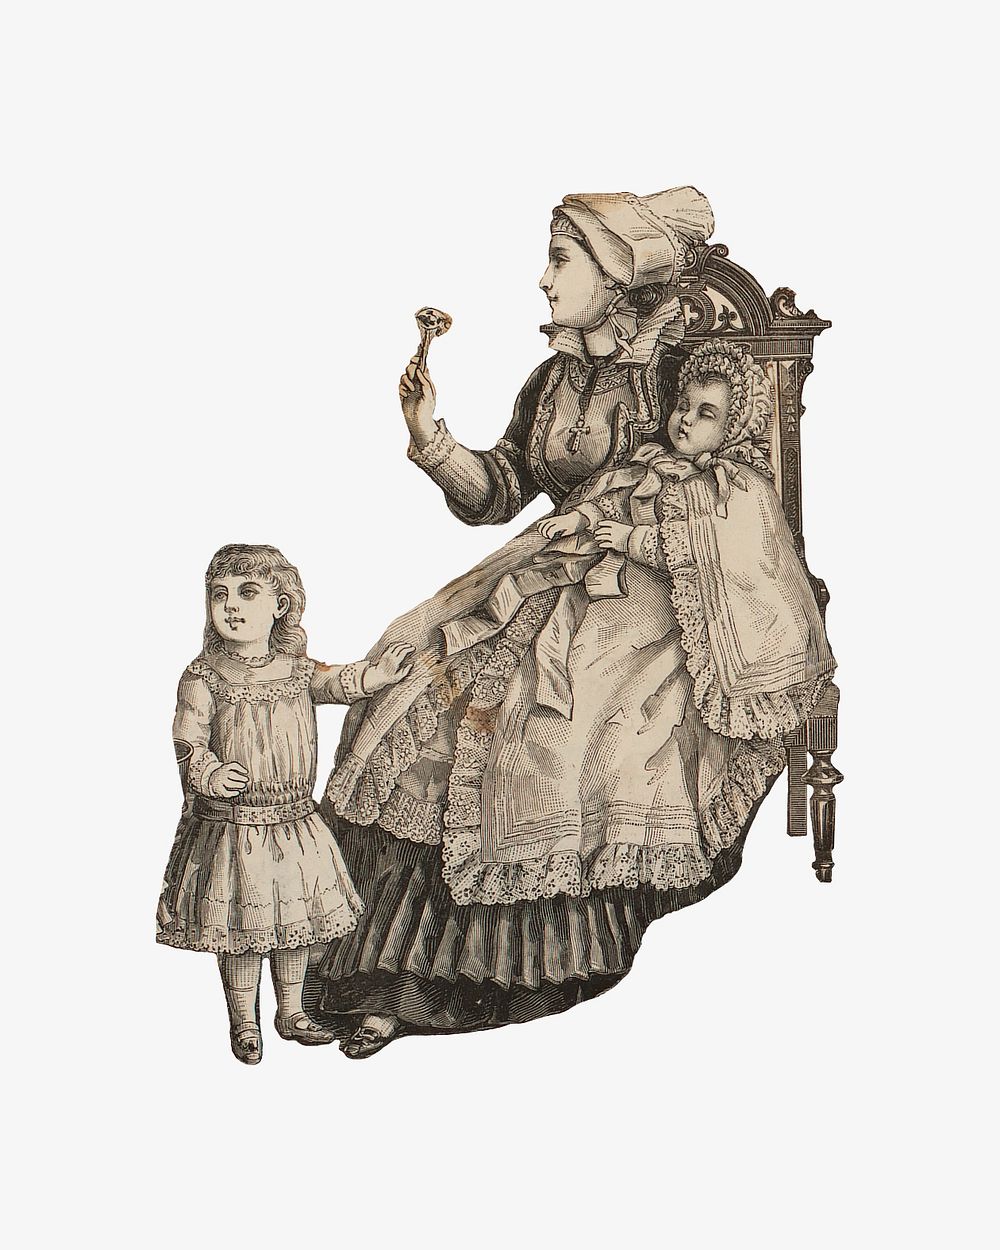 Victorian mother and children, vintage collage element. Remastered by rawpixel.